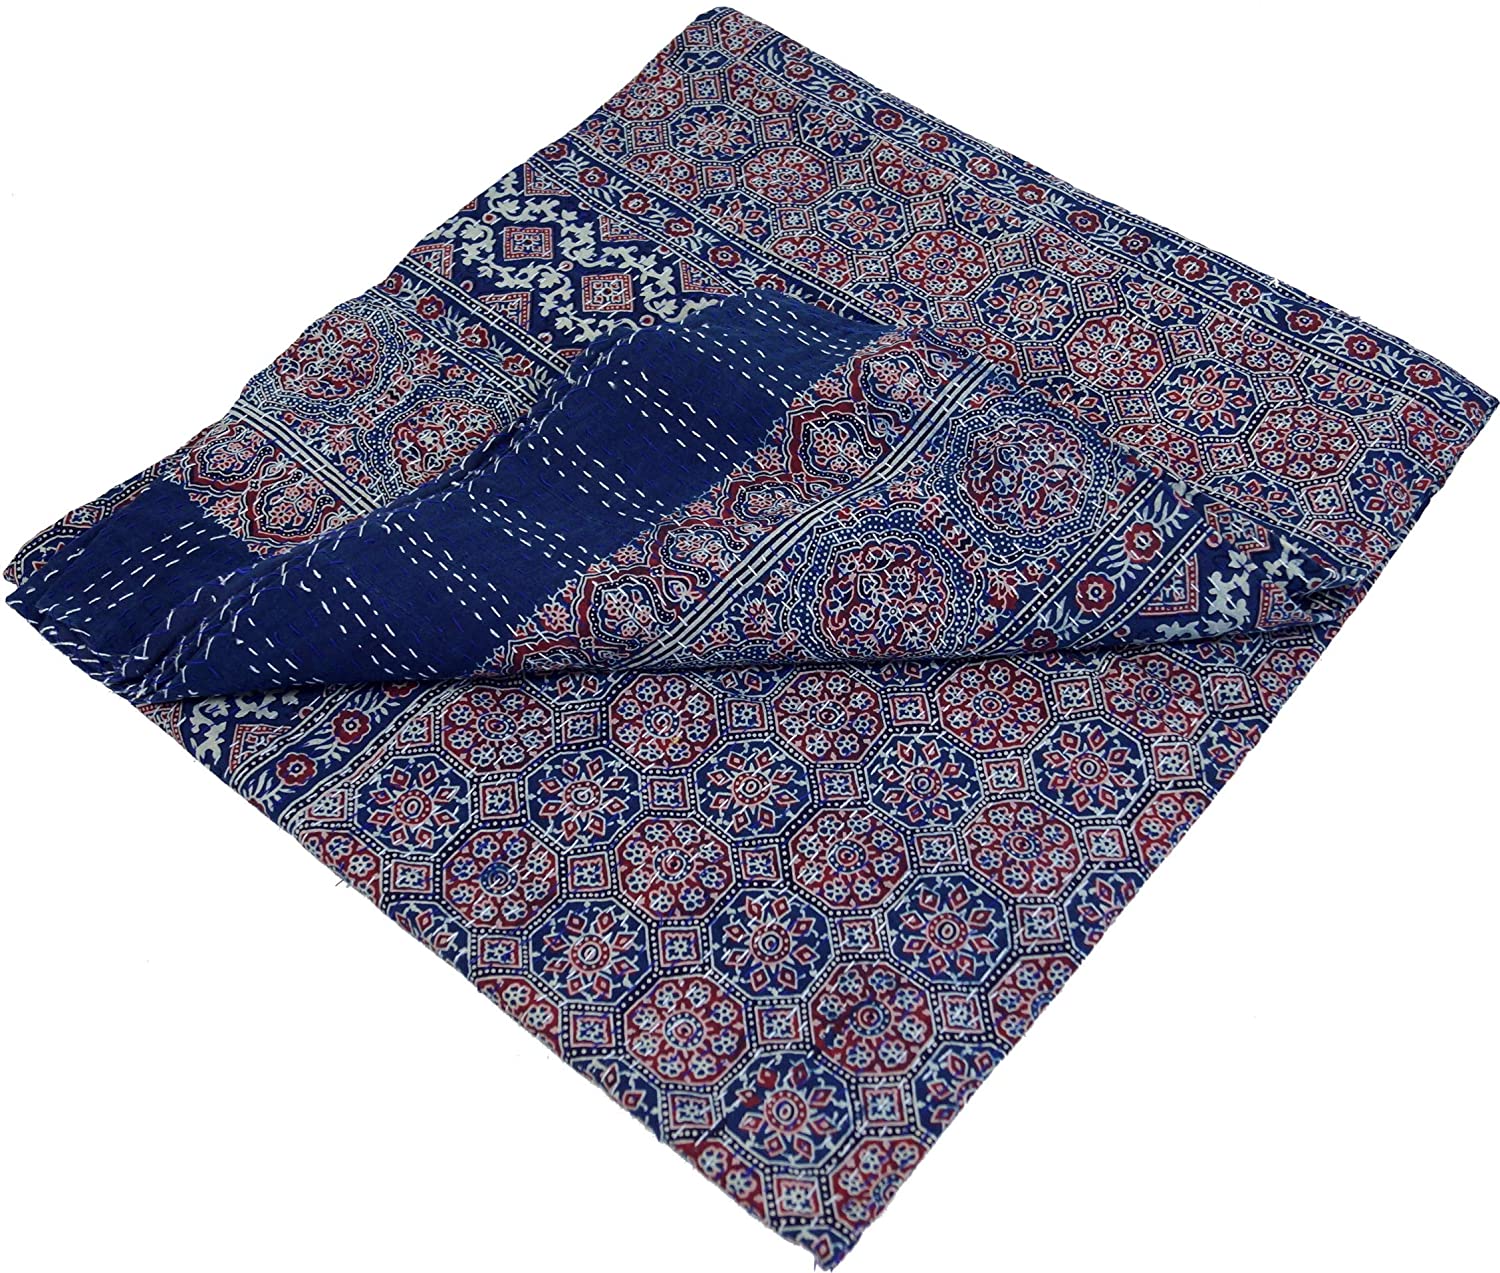 GURU SHOP Quilt, Bedspread, Bed Throw, Embroidered Cloth, Indian Bed Throw, Bedspread, Pattern 14, Blue, Cotton, 275 x 225 cm, Quilts & Quilts